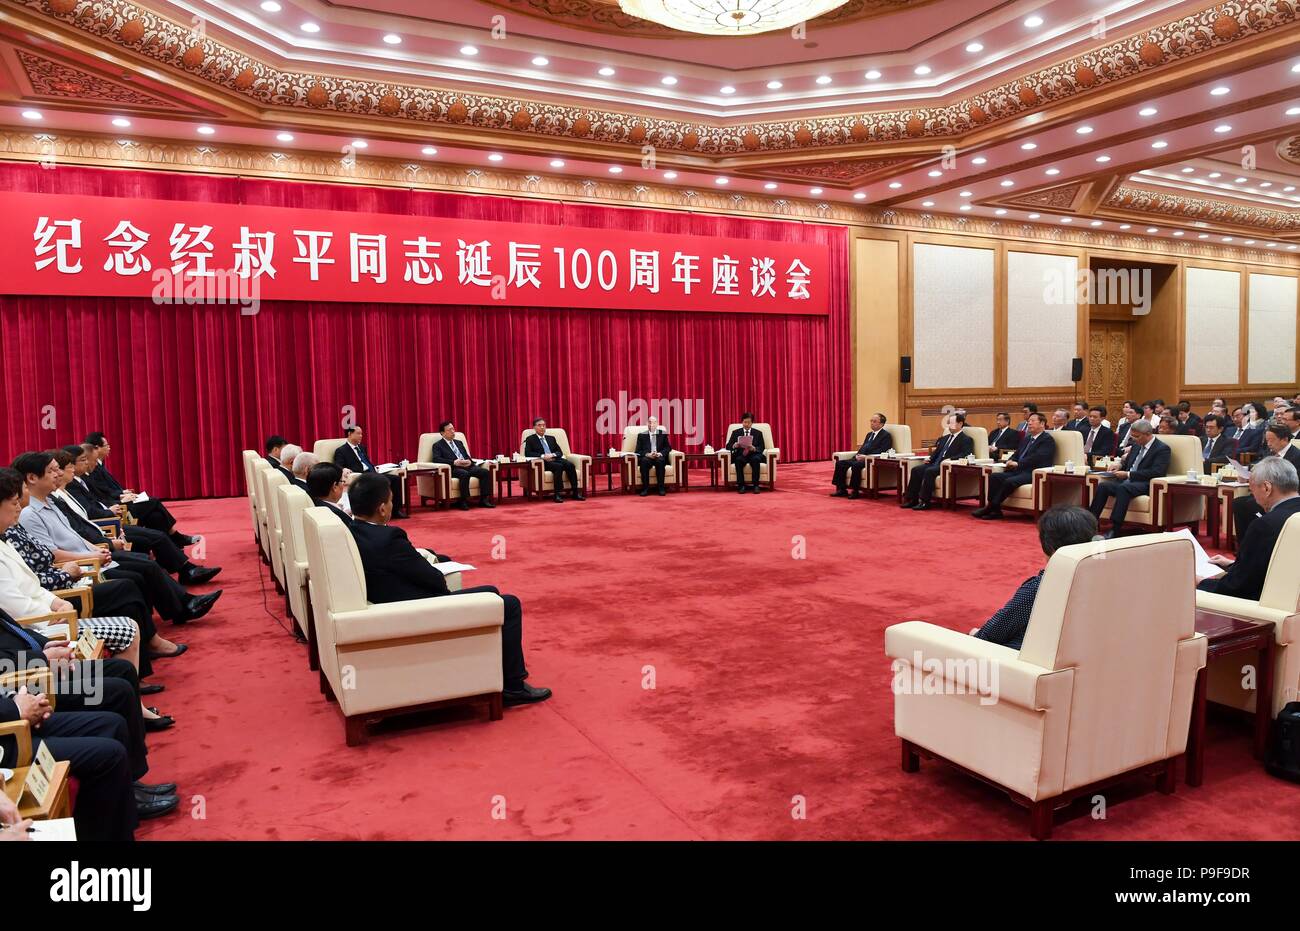 (180718) -- BEIJING, July 18, 2018 (Xinhua) -- A symposium to commemorate the 100th birthday of late Jing Shuping is held in Beijing, capital of China, July 18, 2018. Wang Yang, member of the Standing Committee of the Political Bureau of the Communist Party of China (CPC) Central Committee and chairman of the National Committee of the Chinese People's Political Consultative Conference (CPPCC), attended the symposium and met Jing's relatives. Jing Shuping was one of the pioneers of the country's modern industrial and commercial sector, and once served as chairman of the All-China Federation of Stock Photo